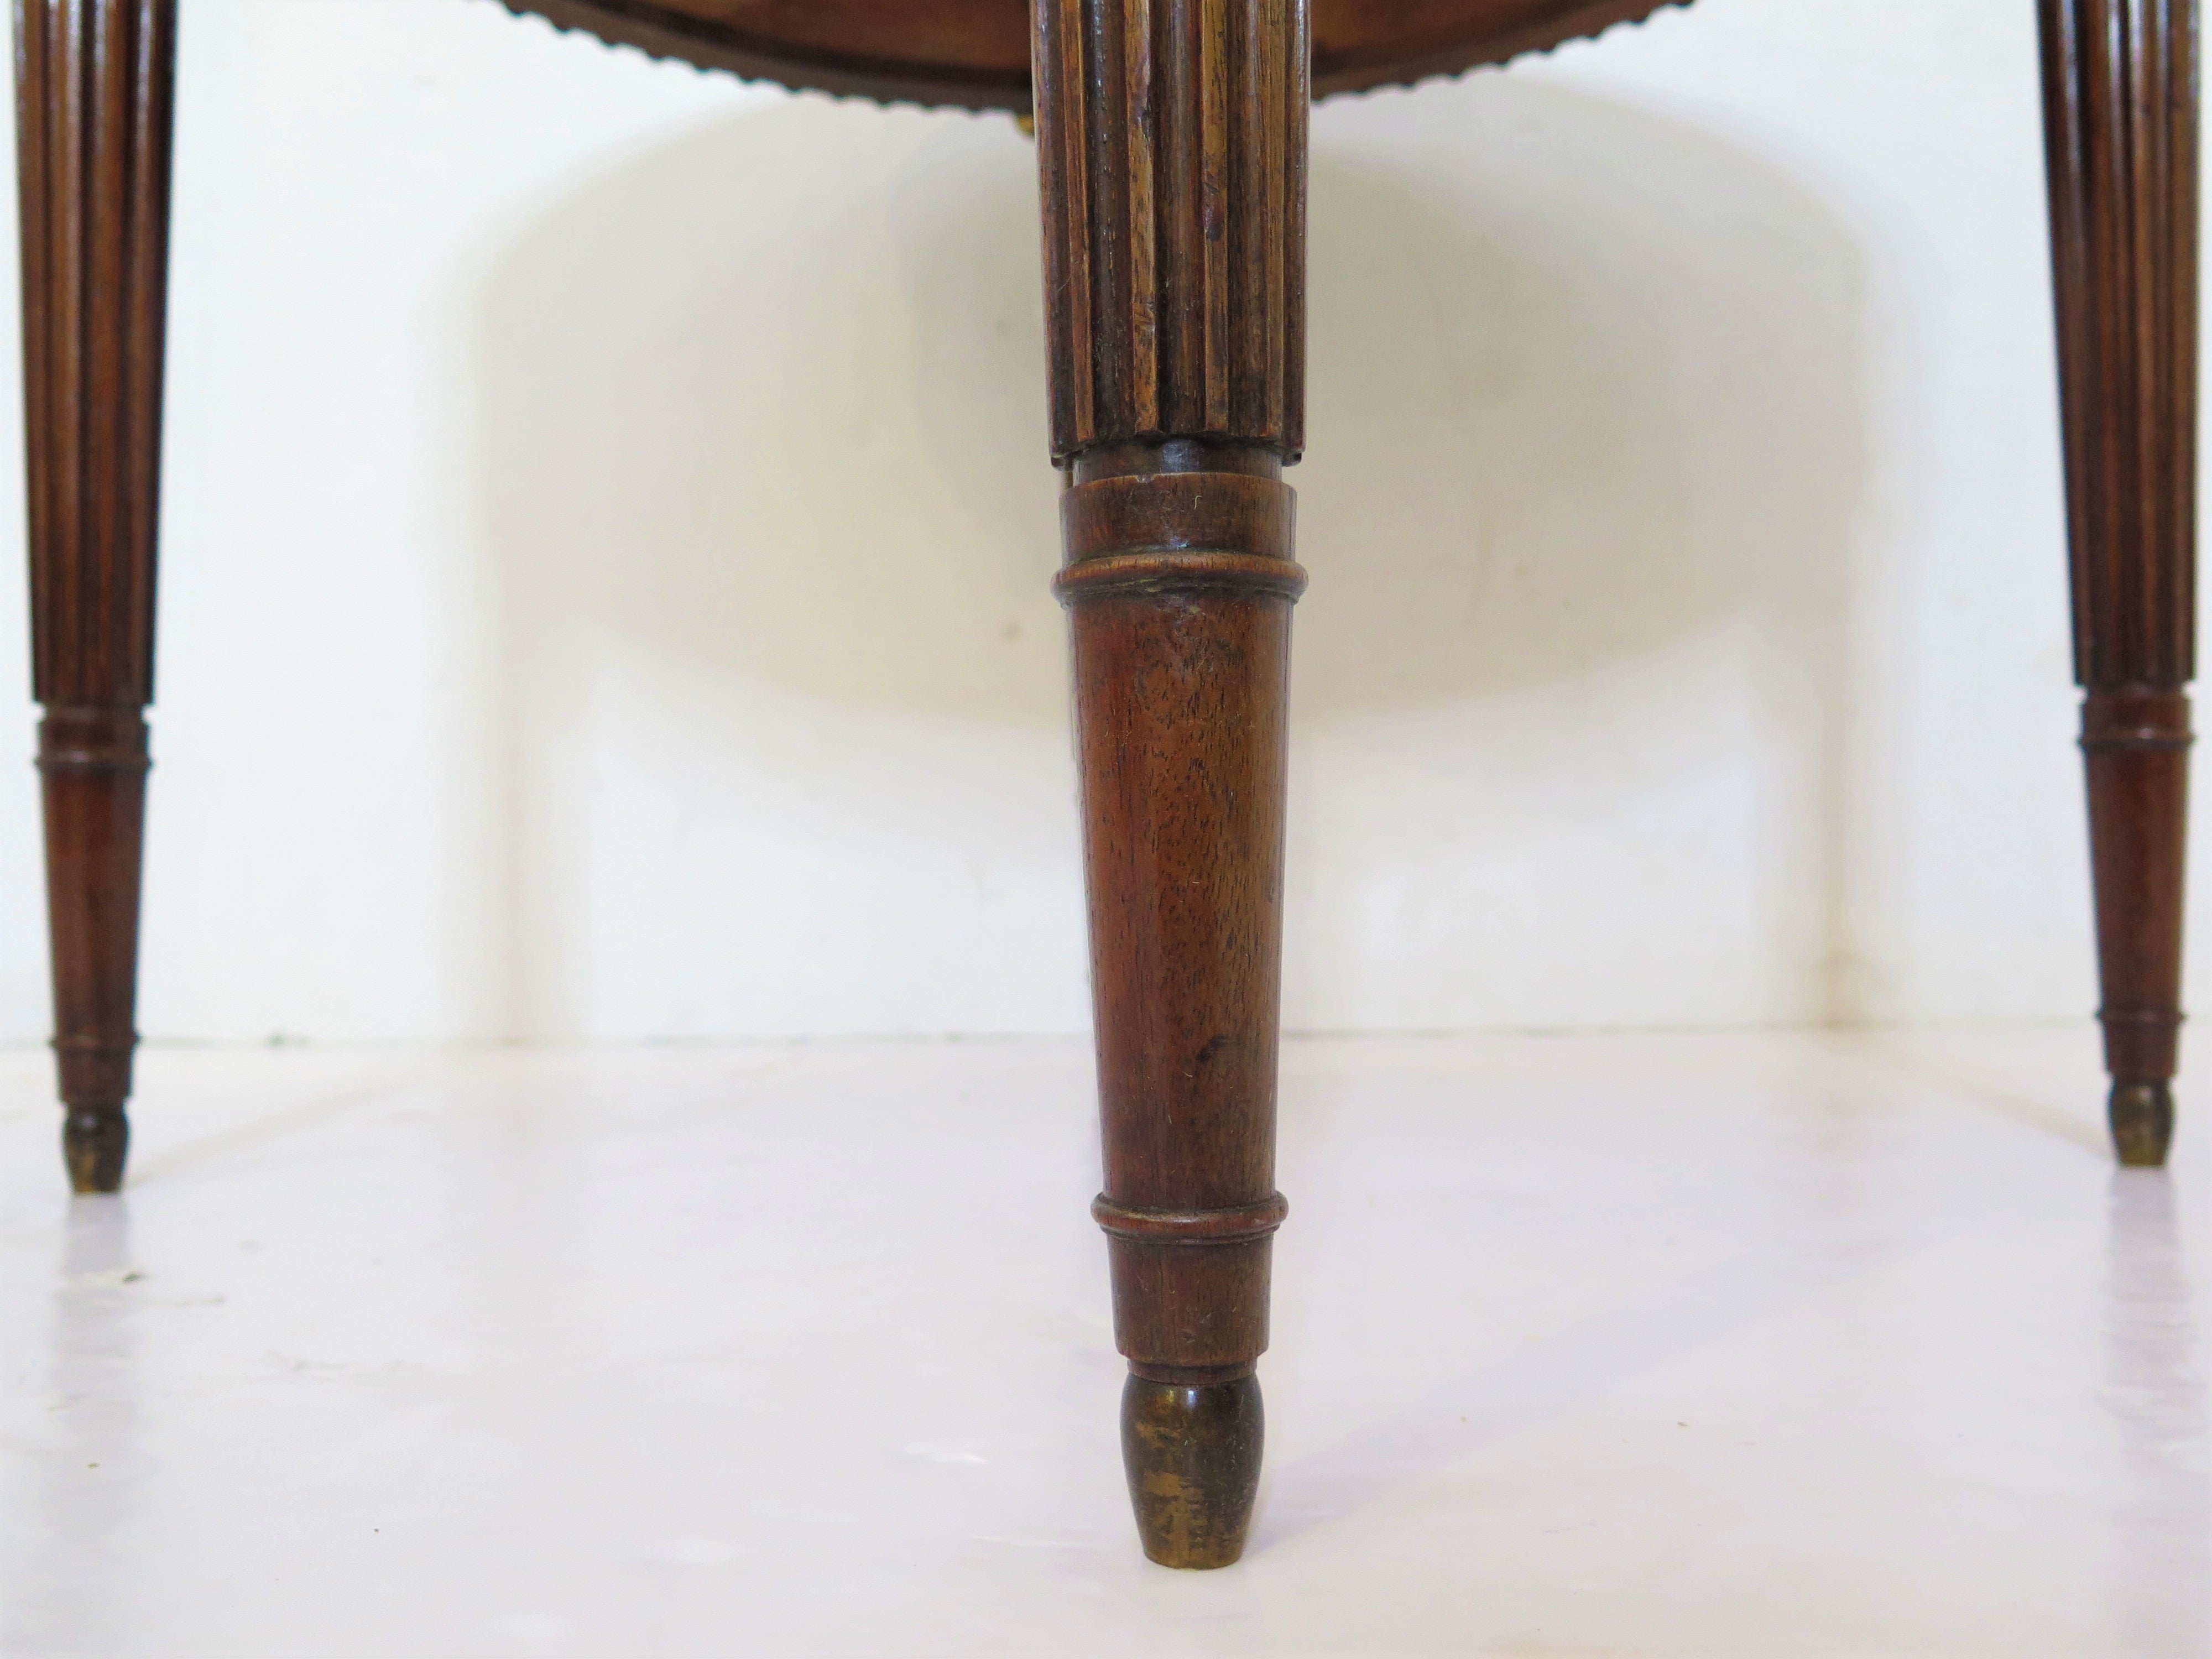 French Art Deco Gueridon / Center Table with Sienna Marble Top